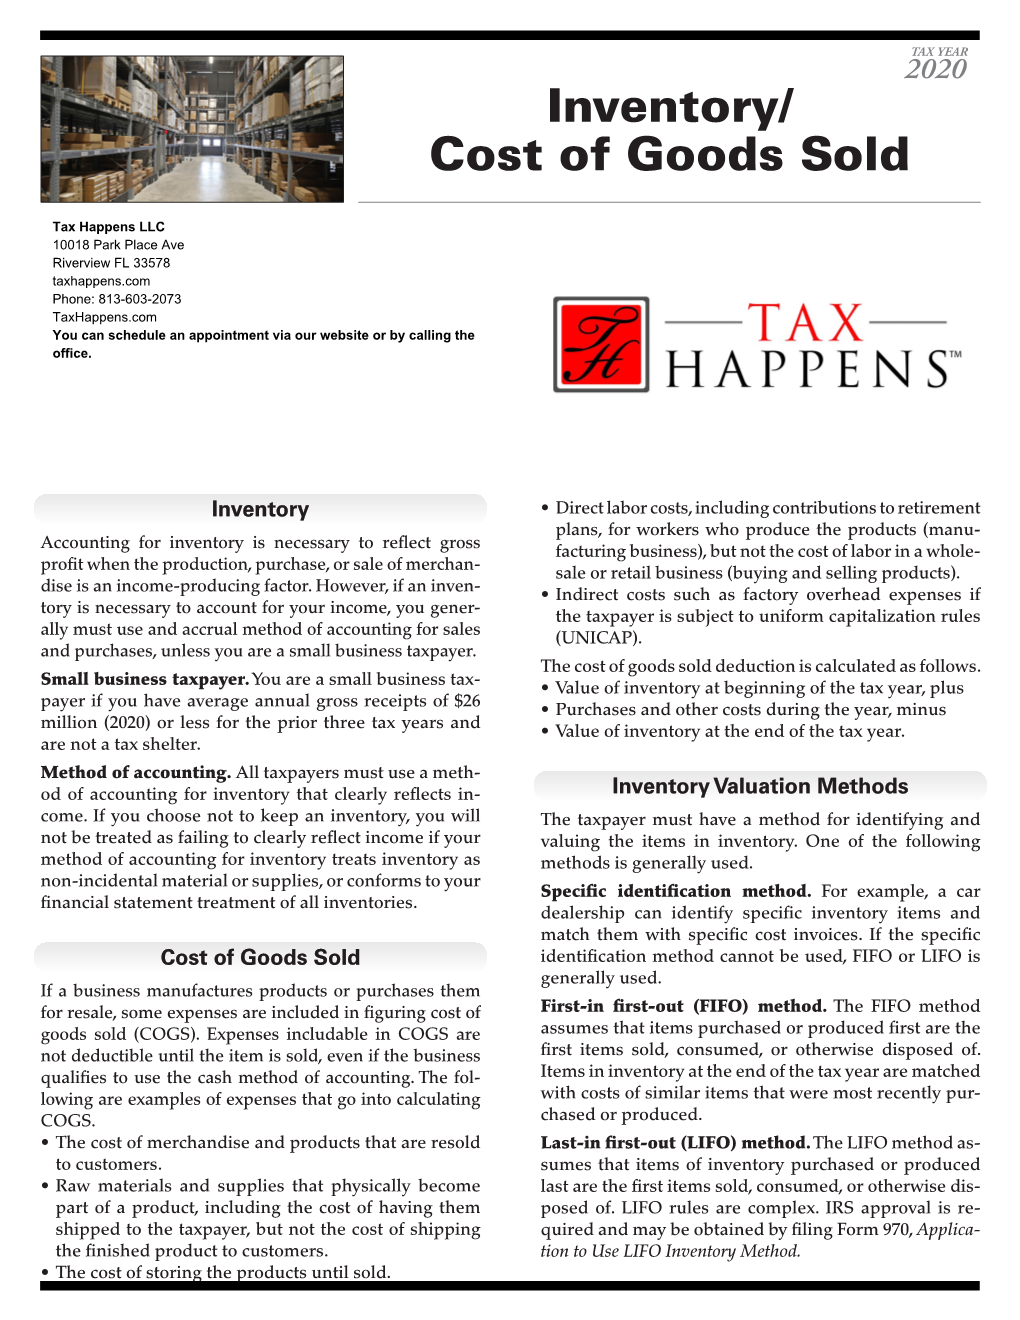 Inventory & Cost of Goods Sold